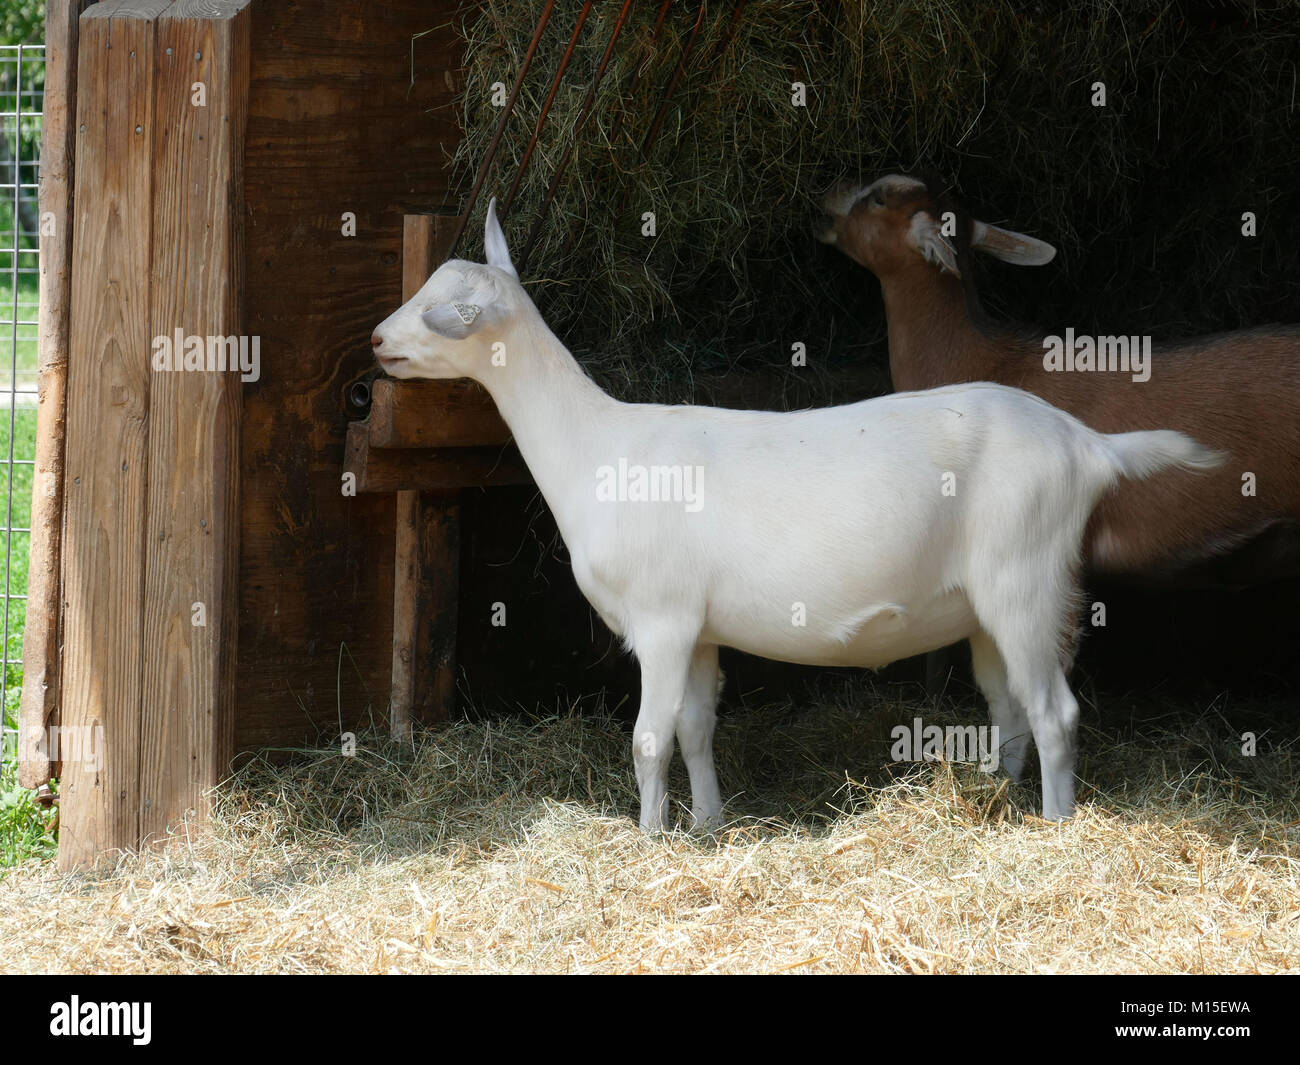 Two Dairy Goats Eating Hay Inside of a Barn Stock Photo